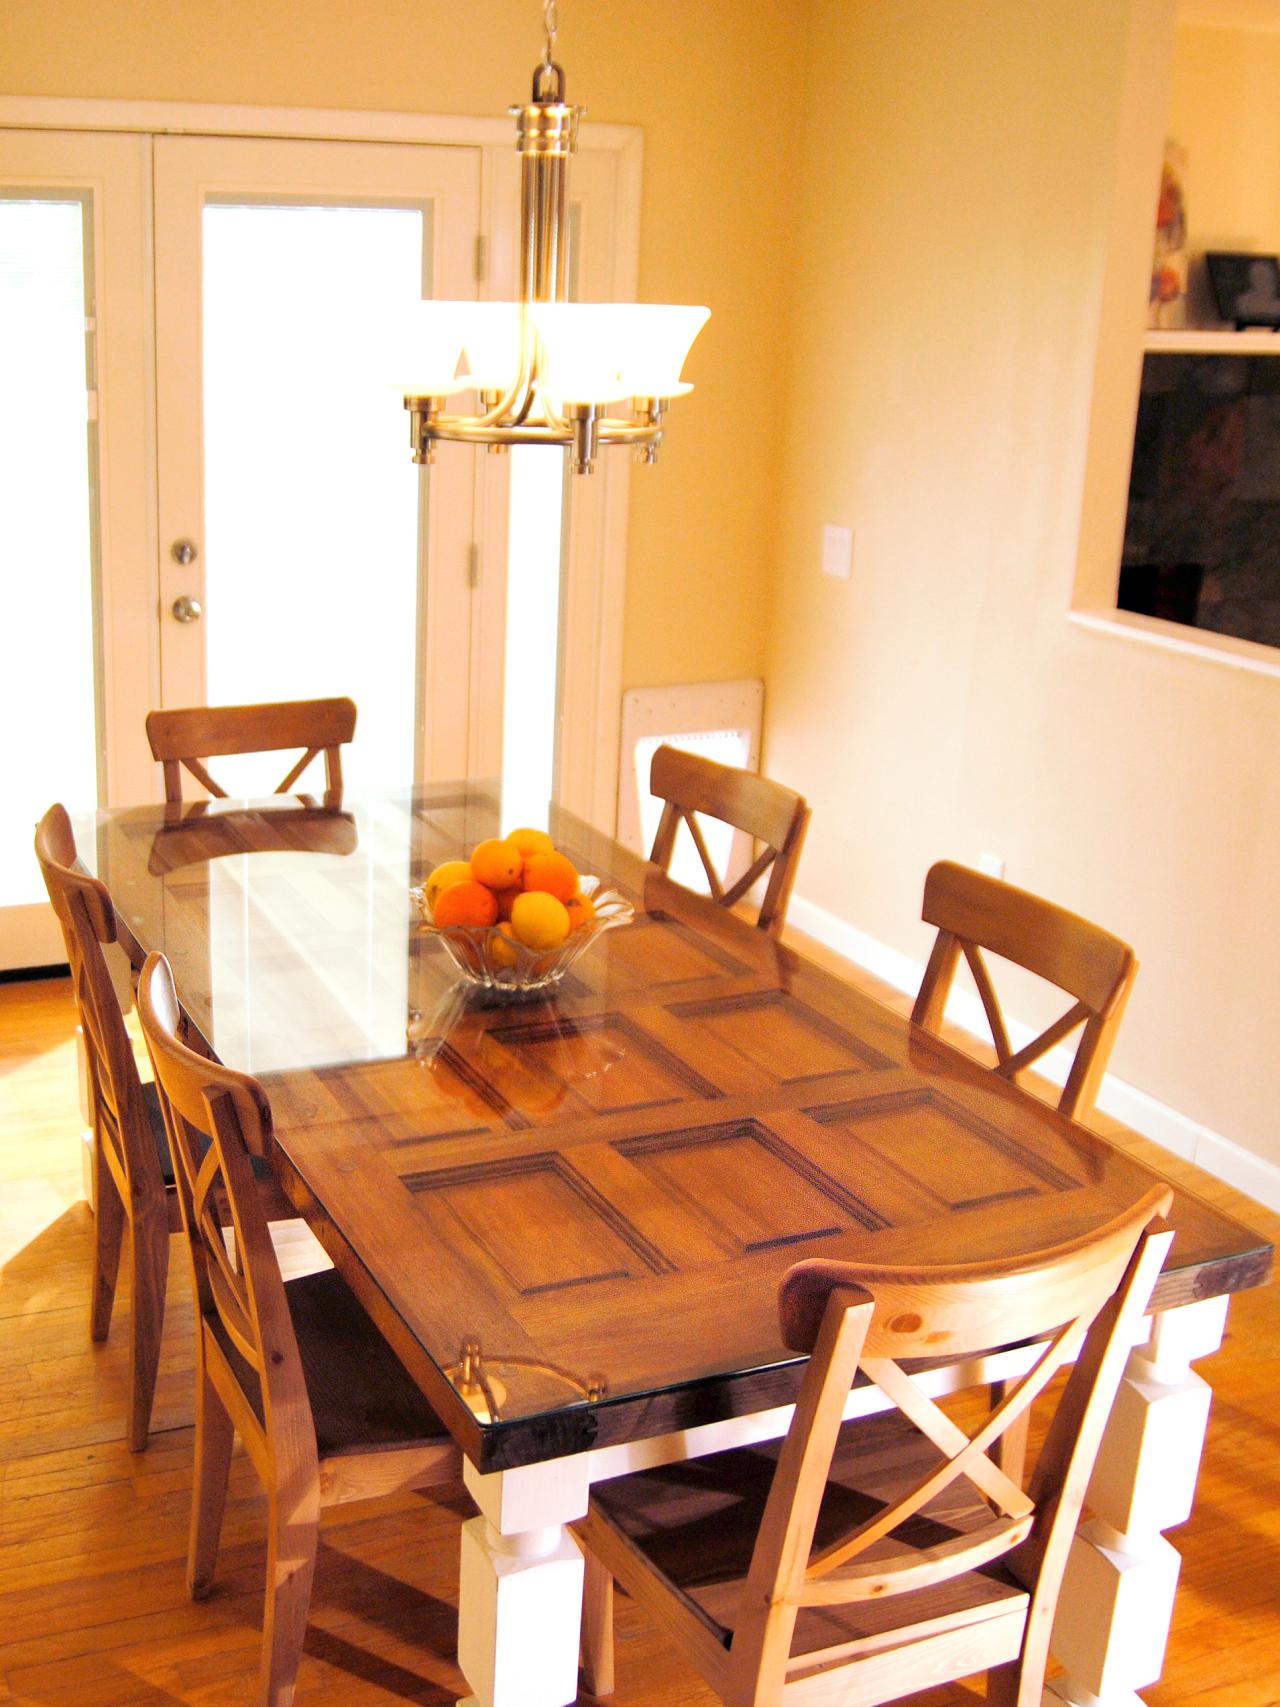 How To Build A Dining Table From An Old Door And Posts Hgtv